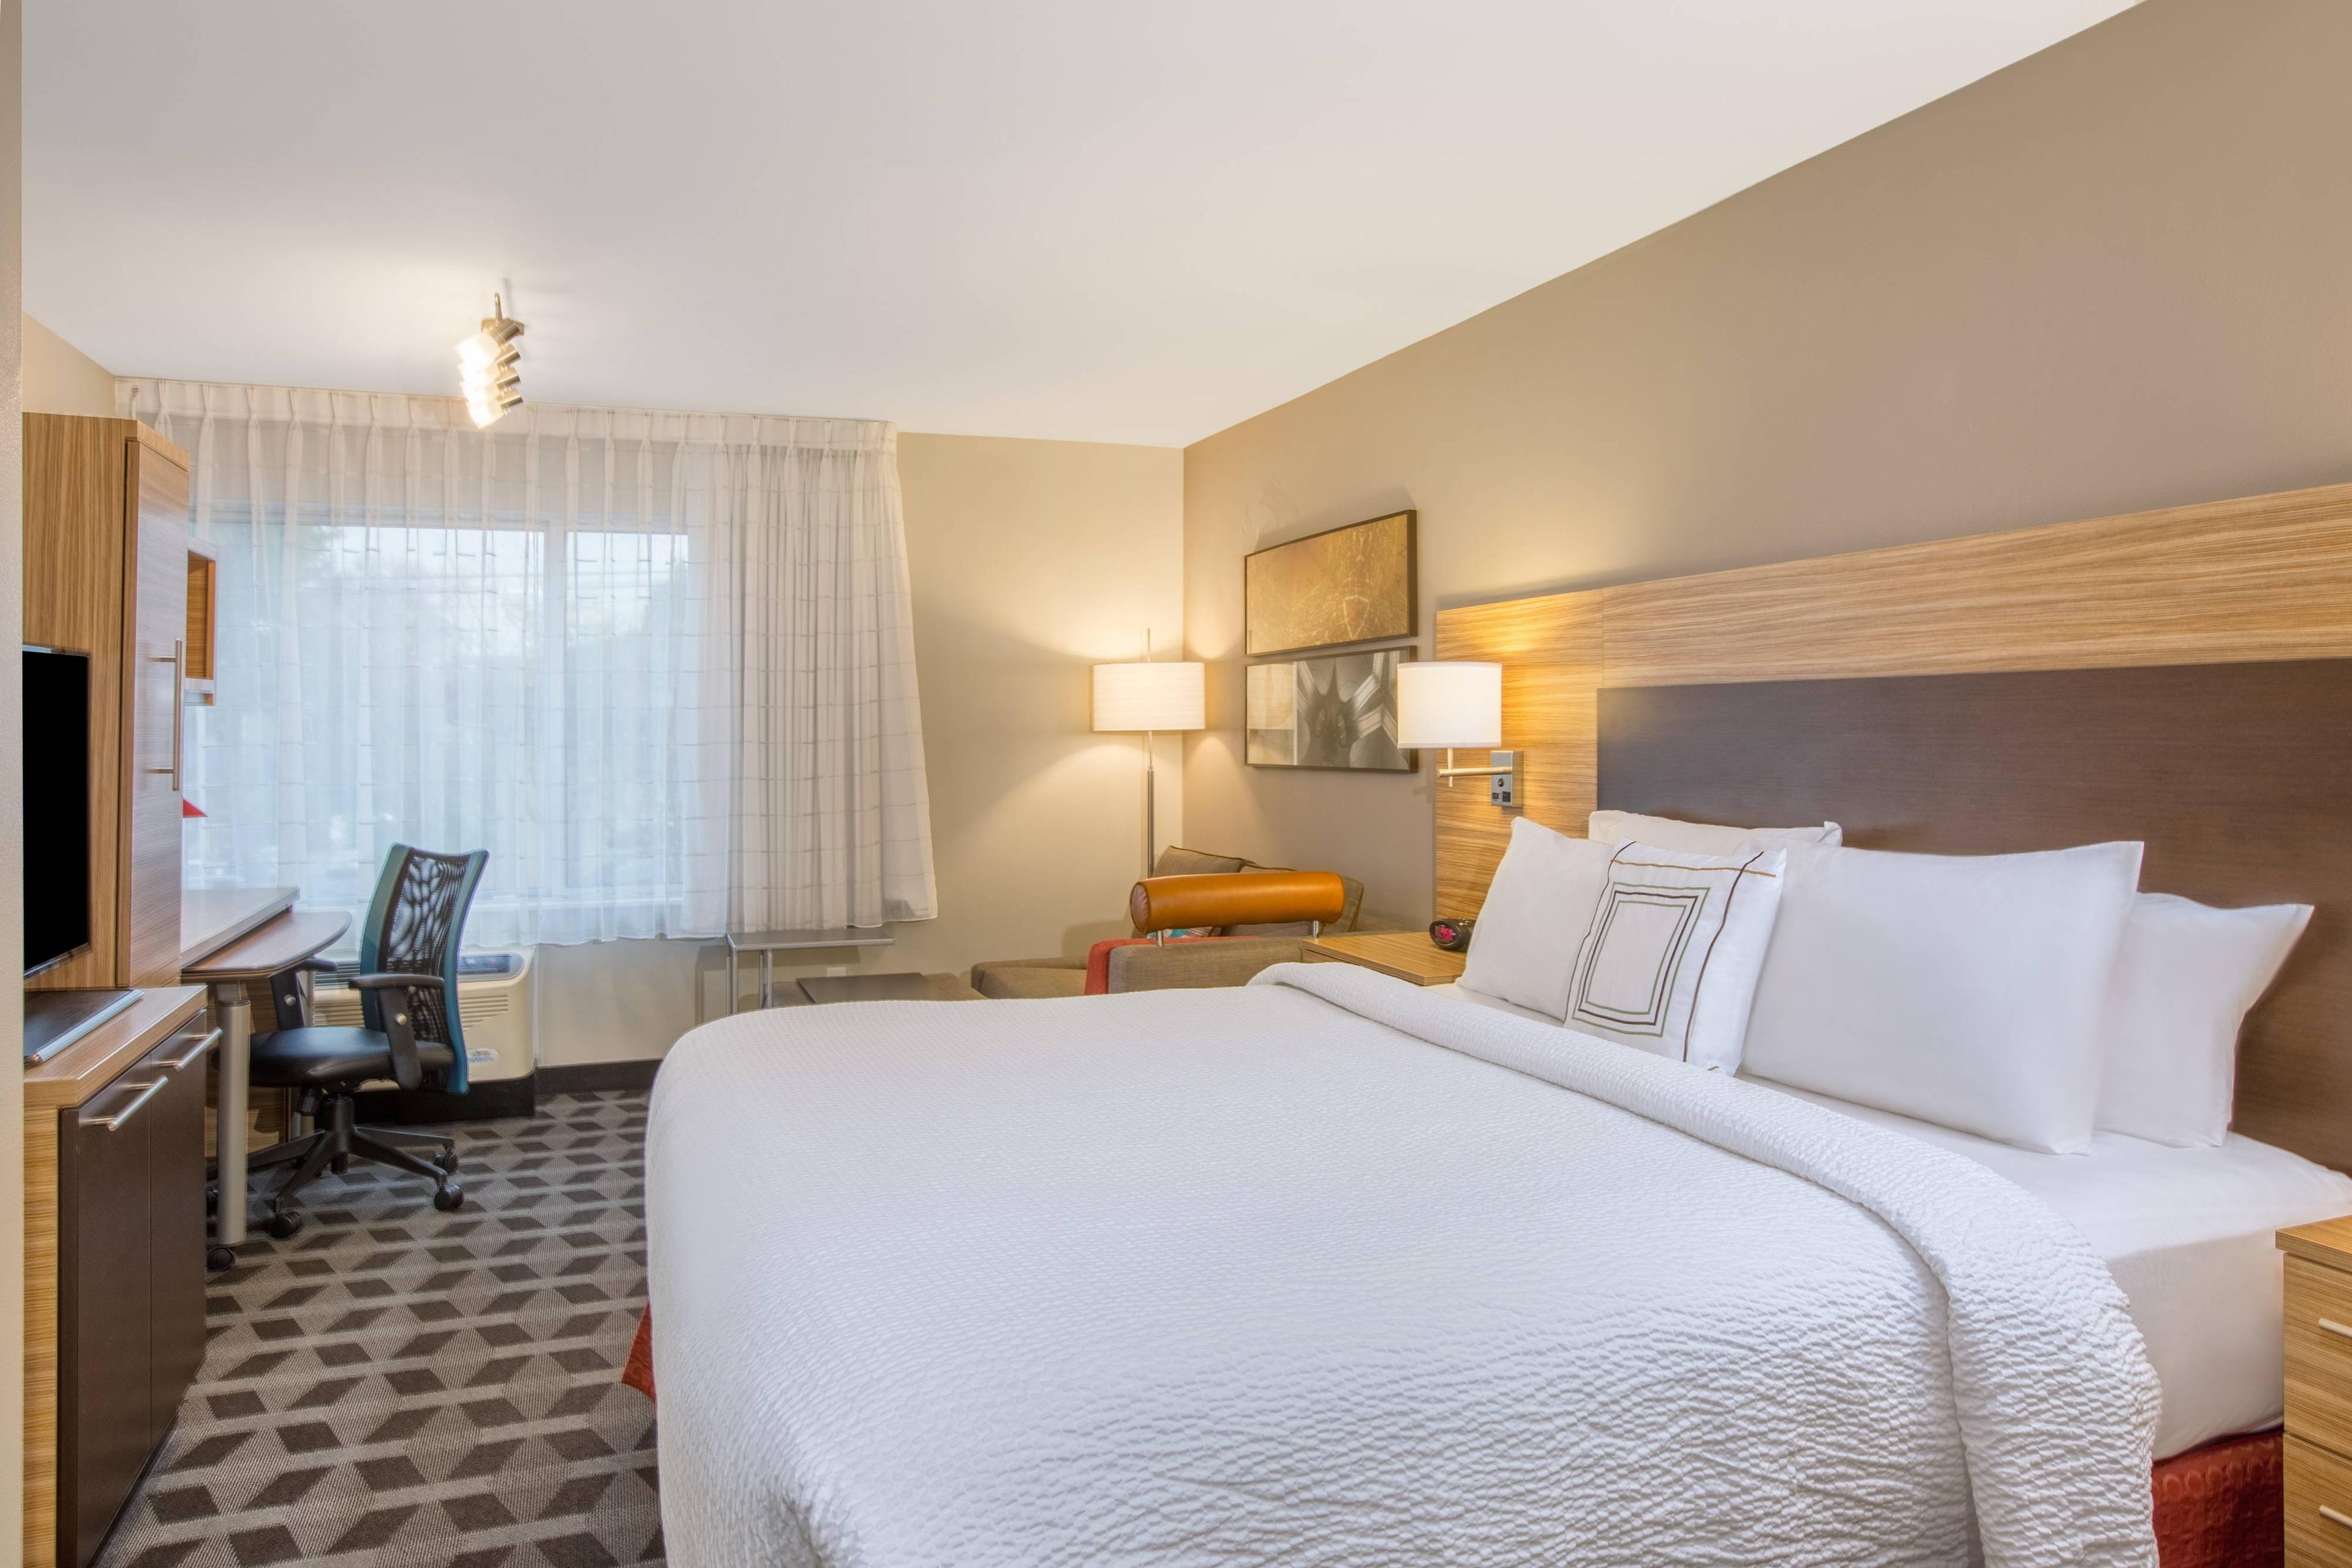 Our large and spacious Queen Studio Suite with a queen bed includes comfortable work space, iron, coffee maker and high definition TV, giving you all the amenities and comforts from home while traveling.